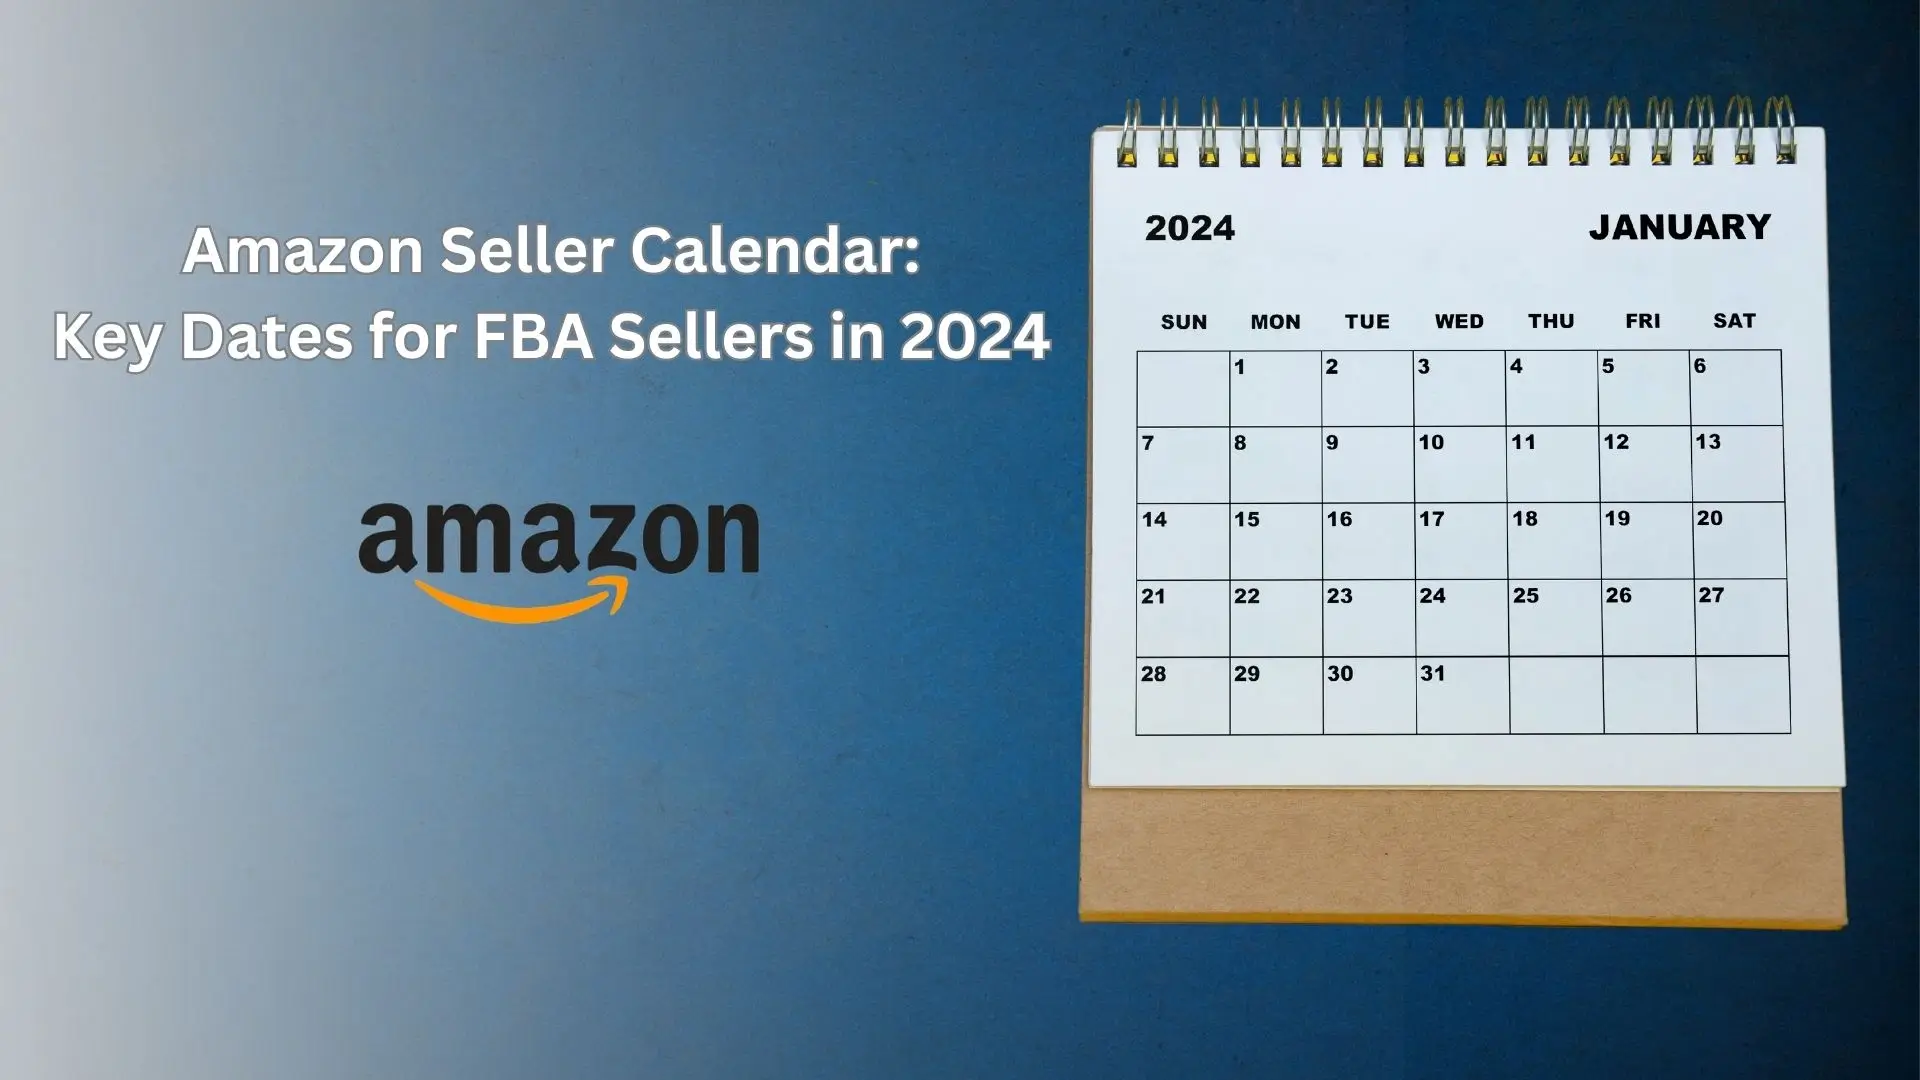 An image with a 2024 calendar, Amazon logo, and text that says Amazon Seller Calendar: Key Dates for FBA Sellers in 2024.